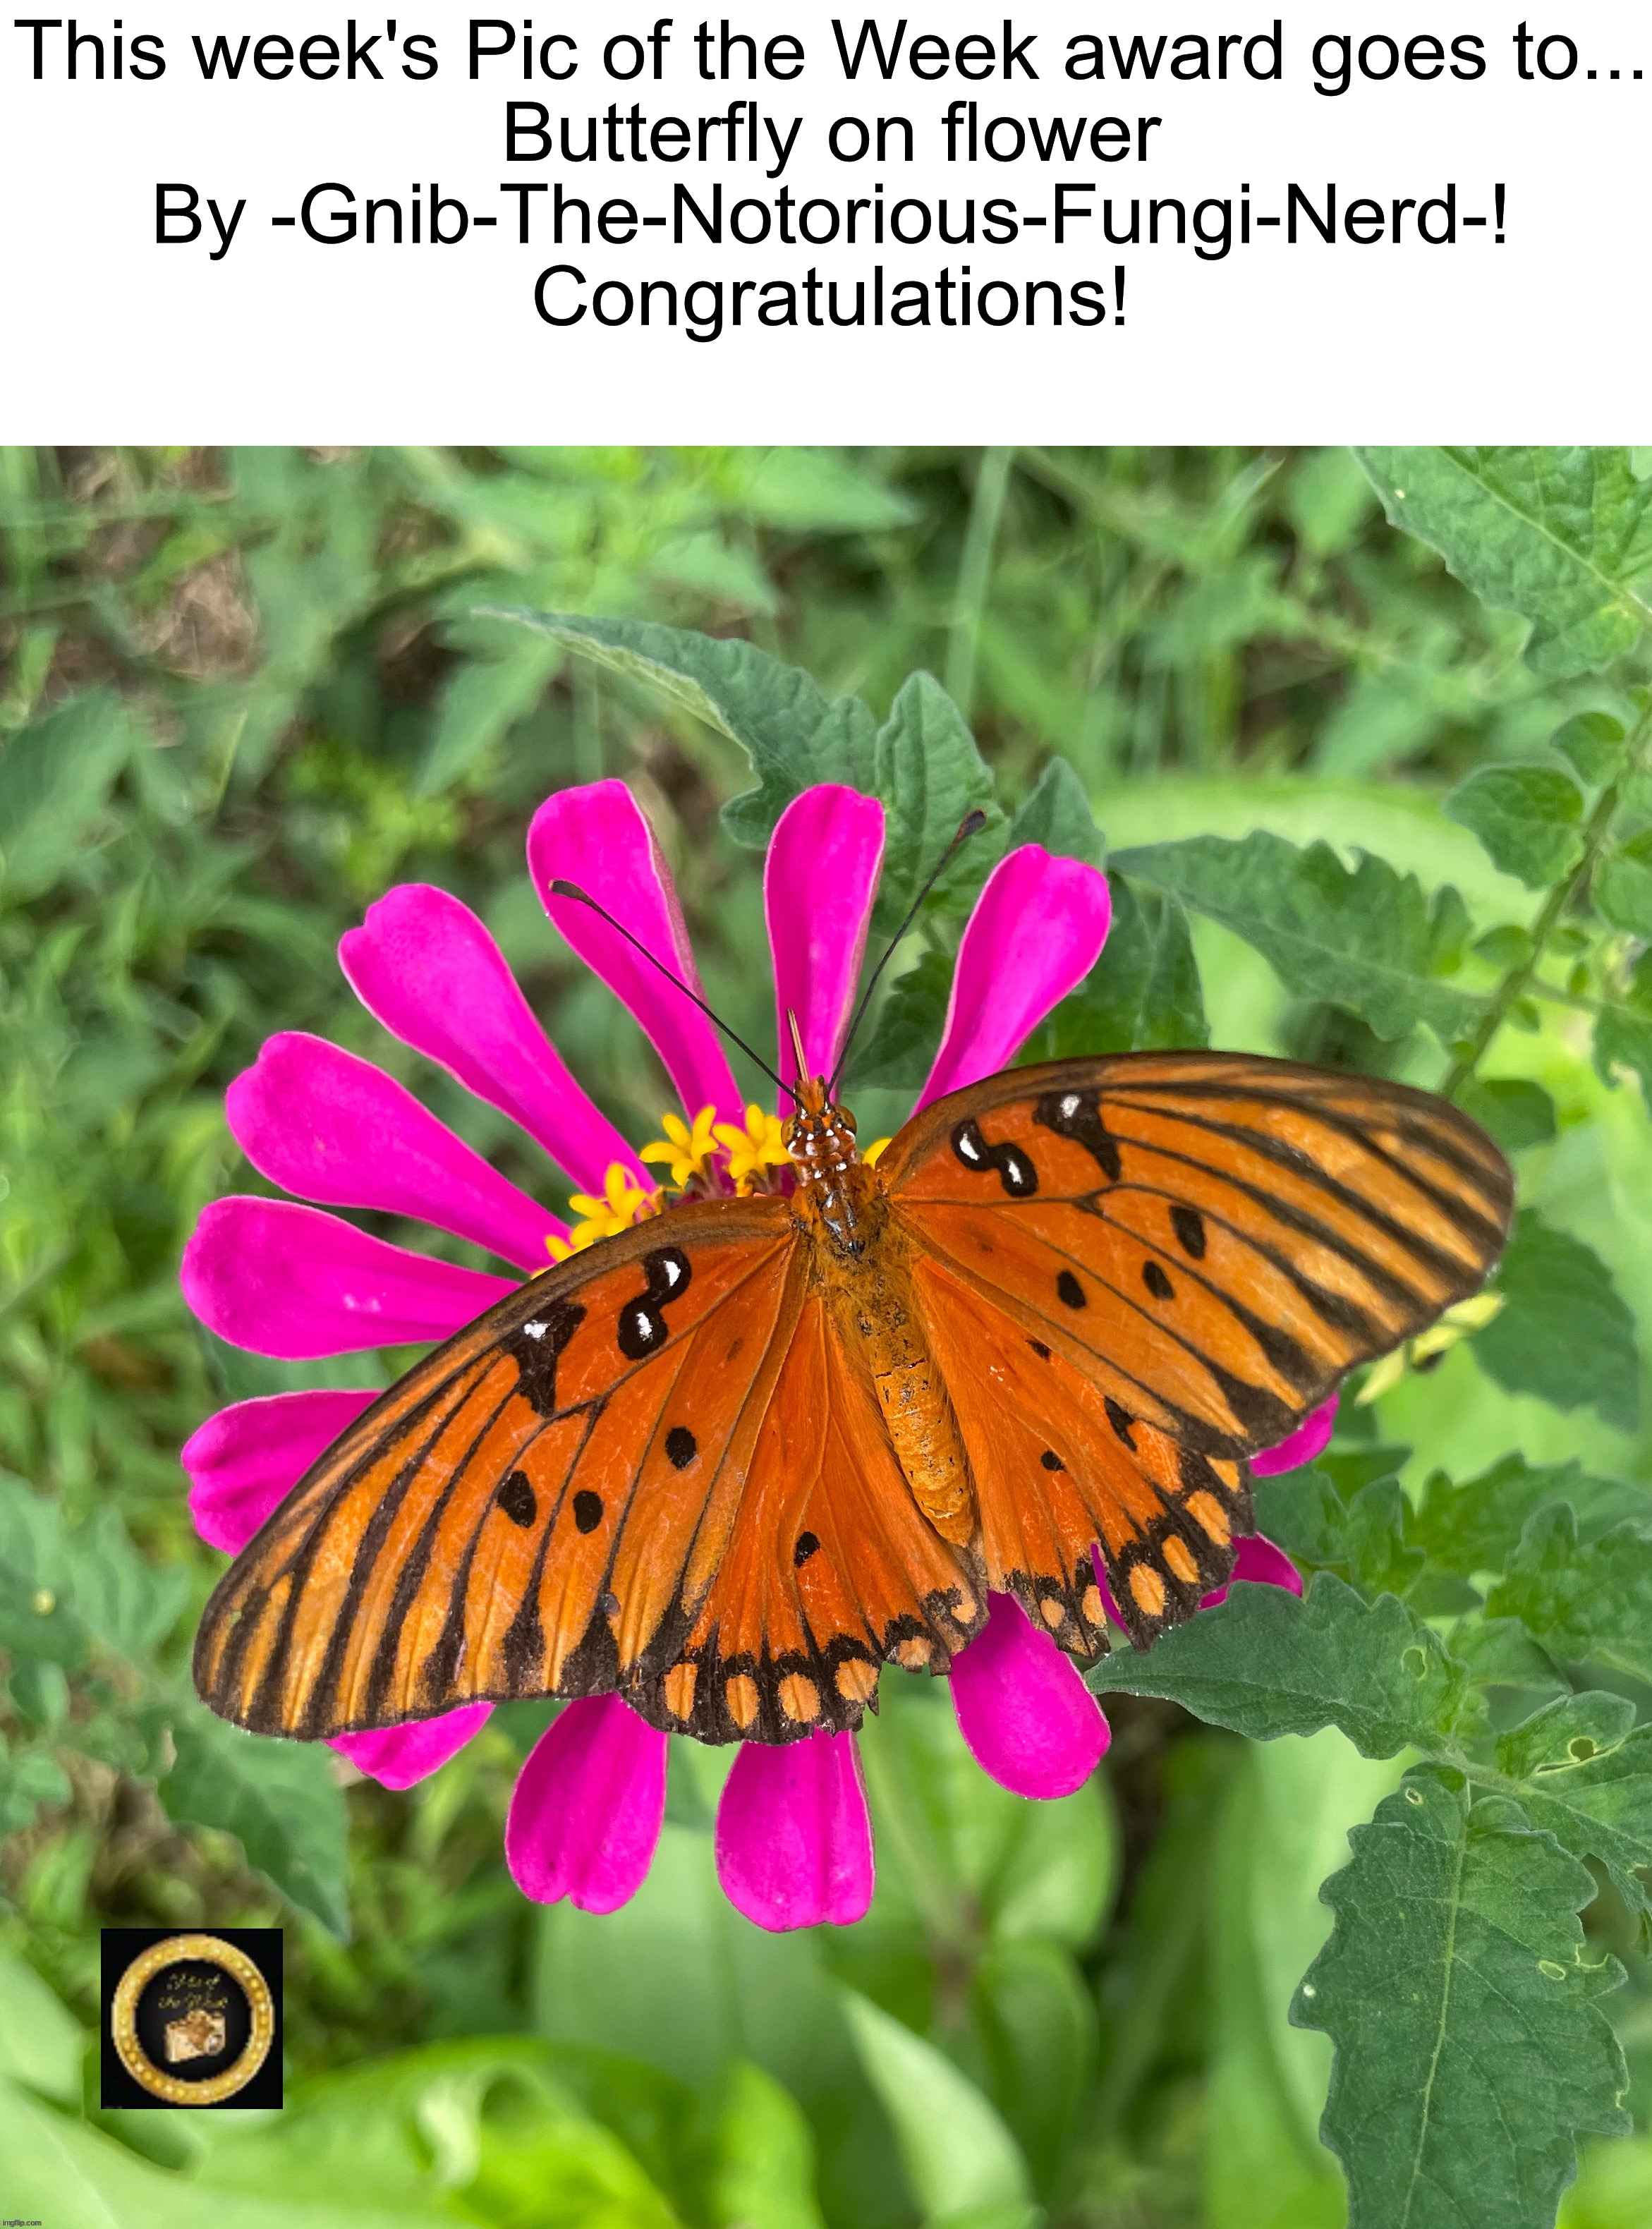 Butterfly on a flower by @-Gnib-The-Notorious-Fungi-Nerd- https://imgflip.com/i/7vk3k0 | This week's Pic of the Week award goes to...
Butterfly on flower
By -Gnib-The-Notorious-Fungi-Nerd-!
Congratulations! | image tagged in share your own photos | made w/ Imgflip meme maker